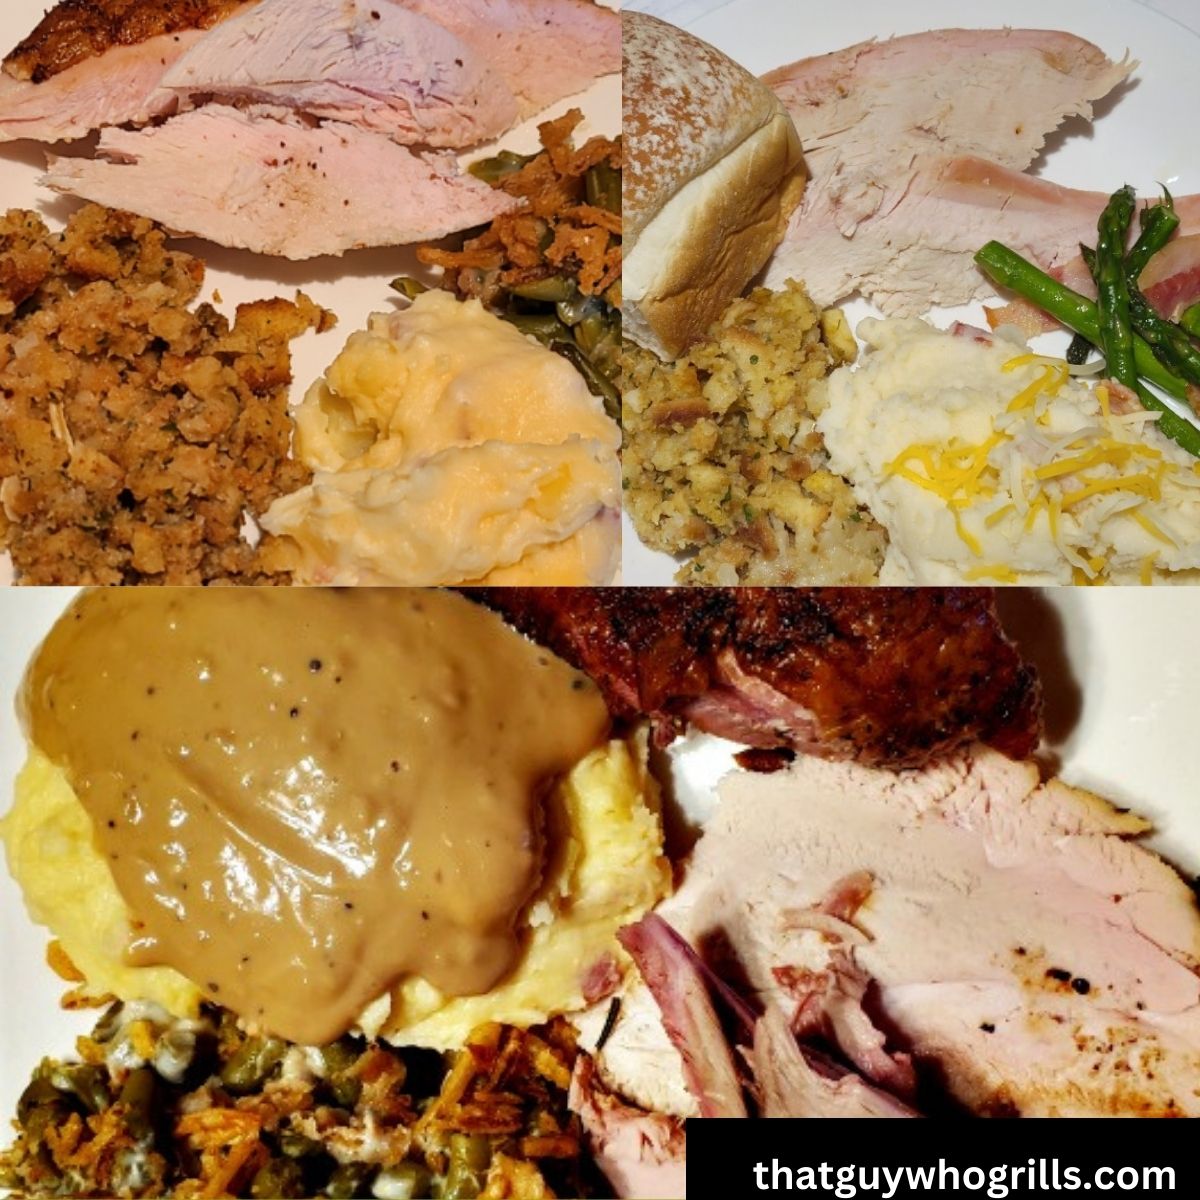 Three different plates of classic side dishes with smoked turkey